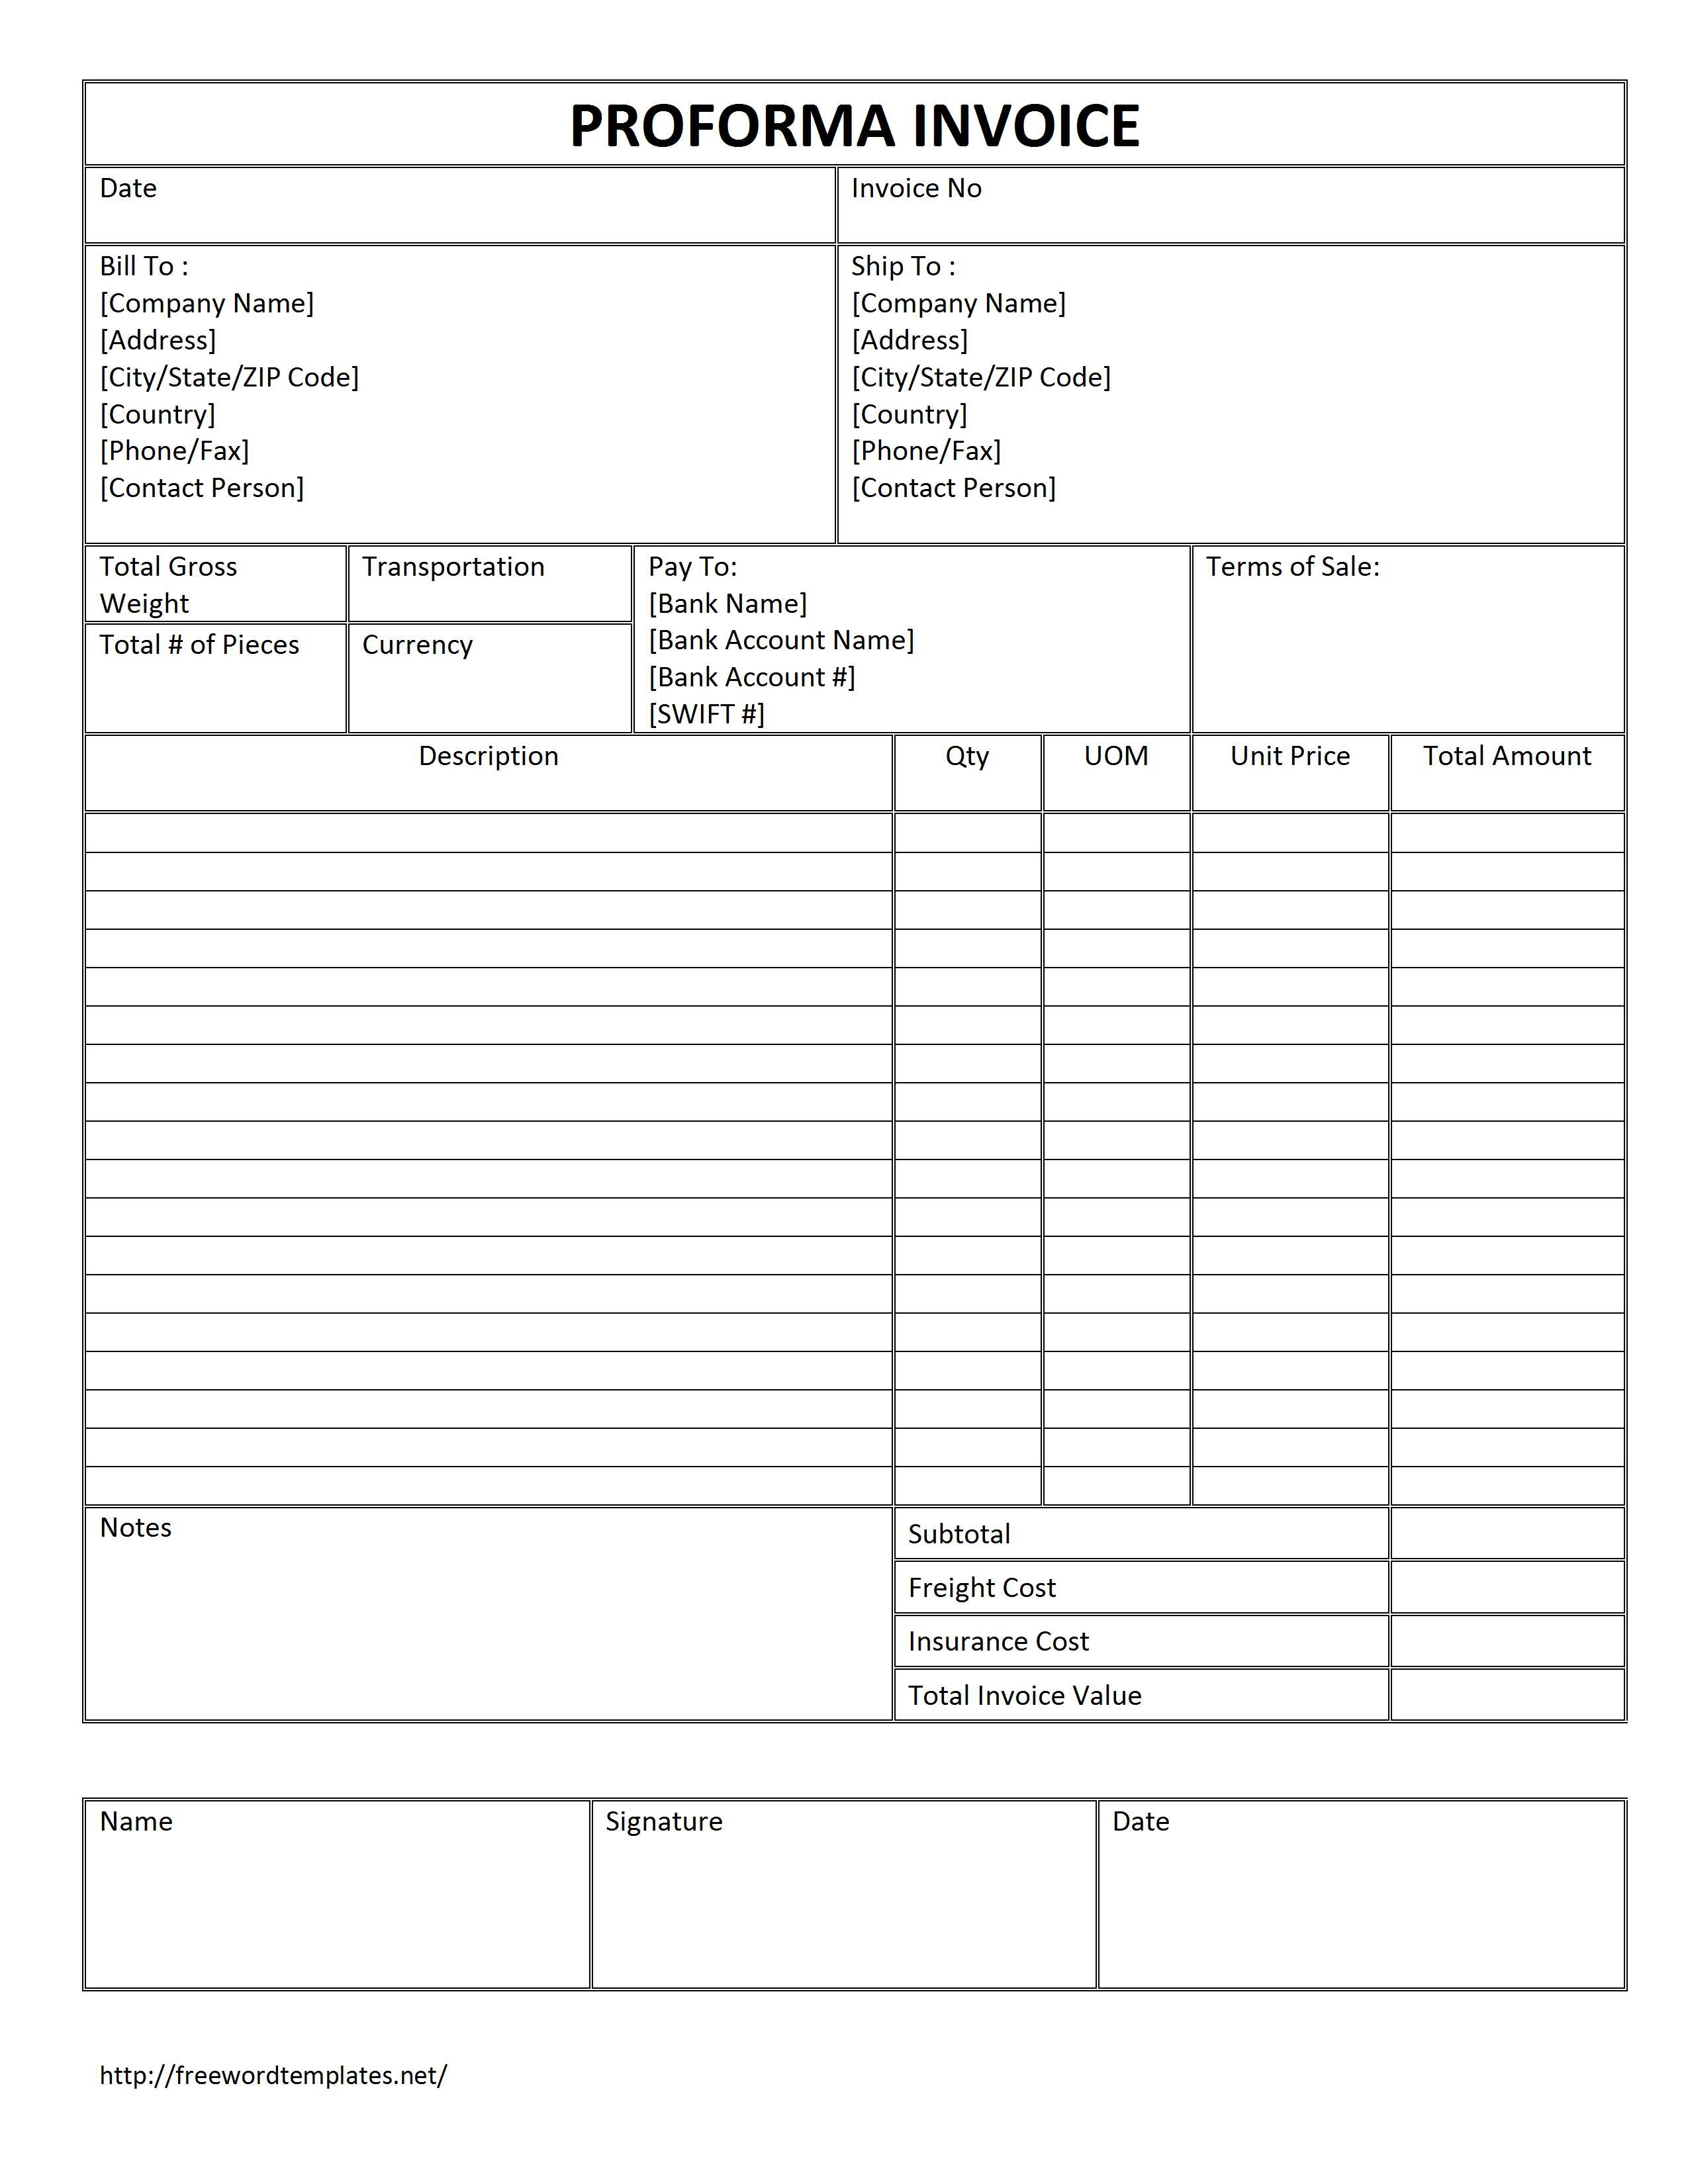 consultant invoice word templates free word templates ms proforma invoice template uk